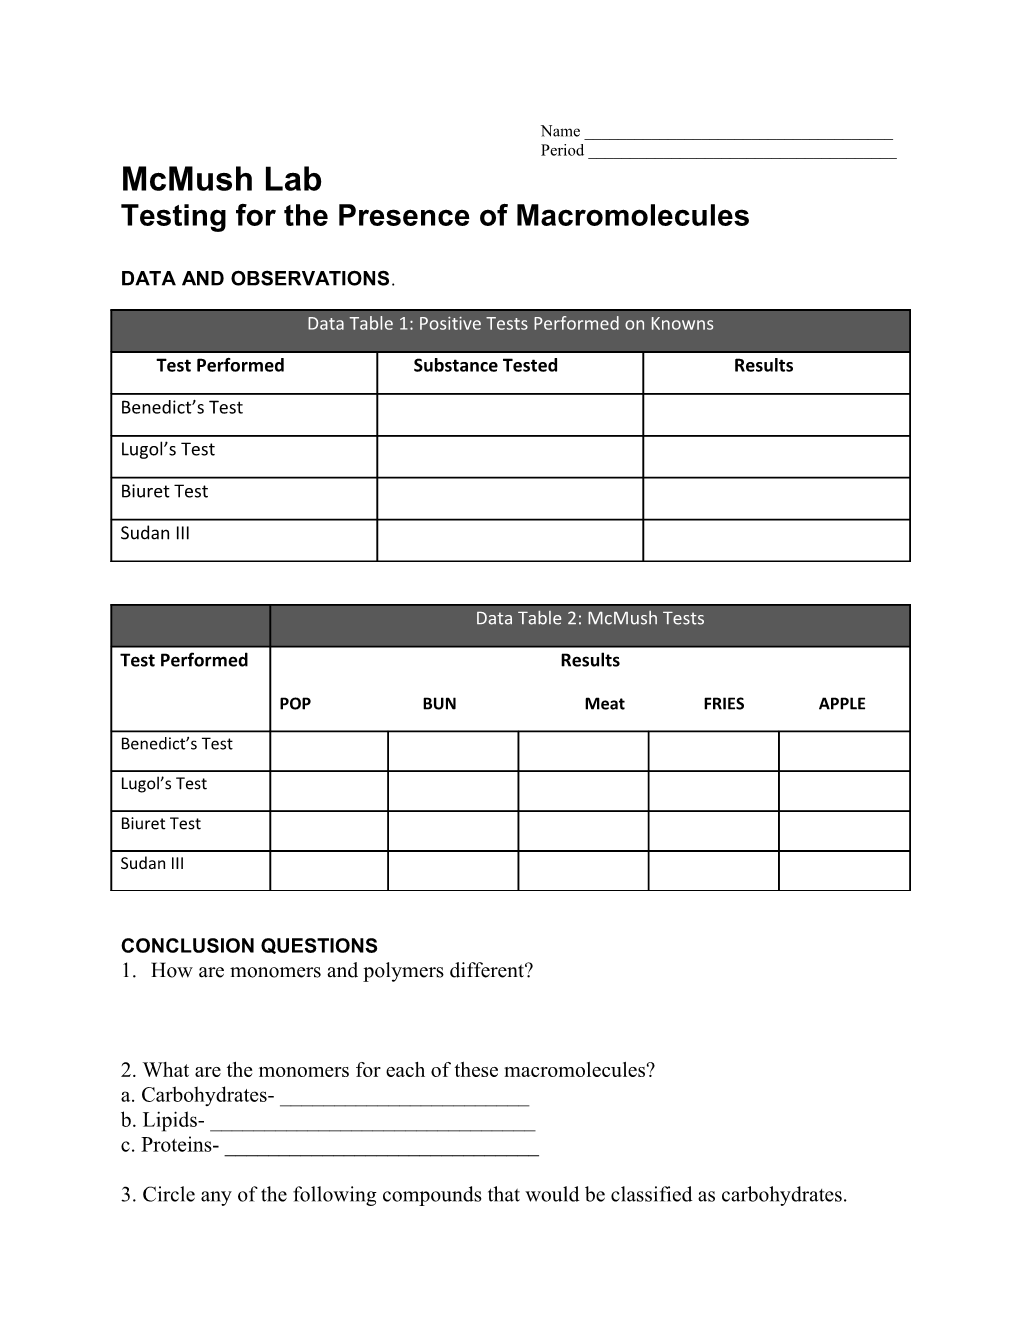 Testing for the Presence of Macromolecules